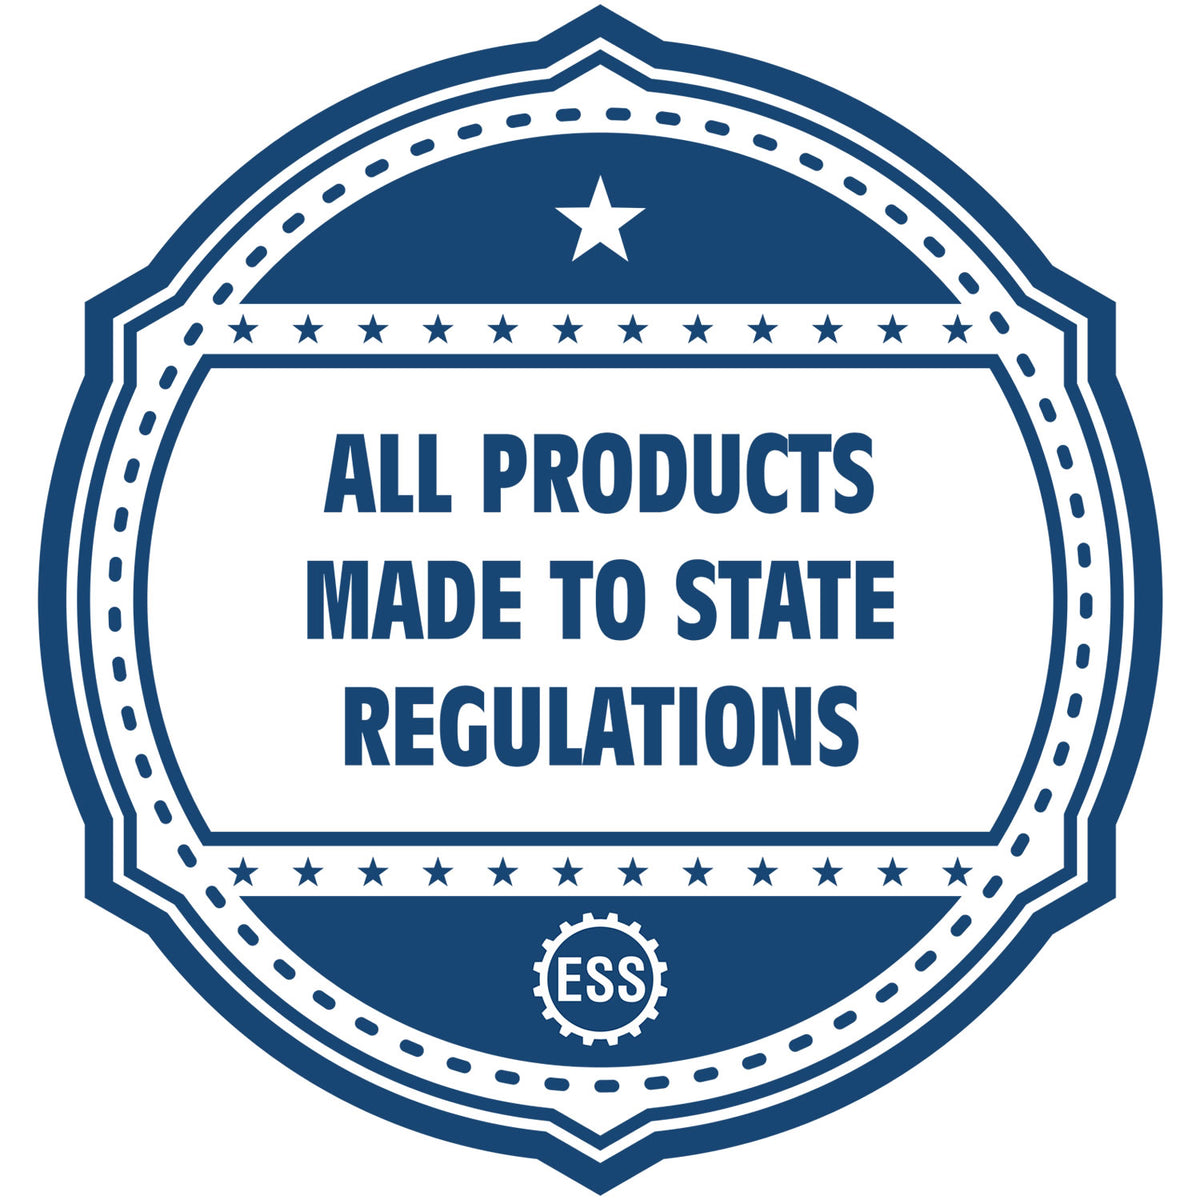 An icon or badge element for the State of Washington Extended Long Reach Engineer Seal showing that this product is made in compliance with state regulations.